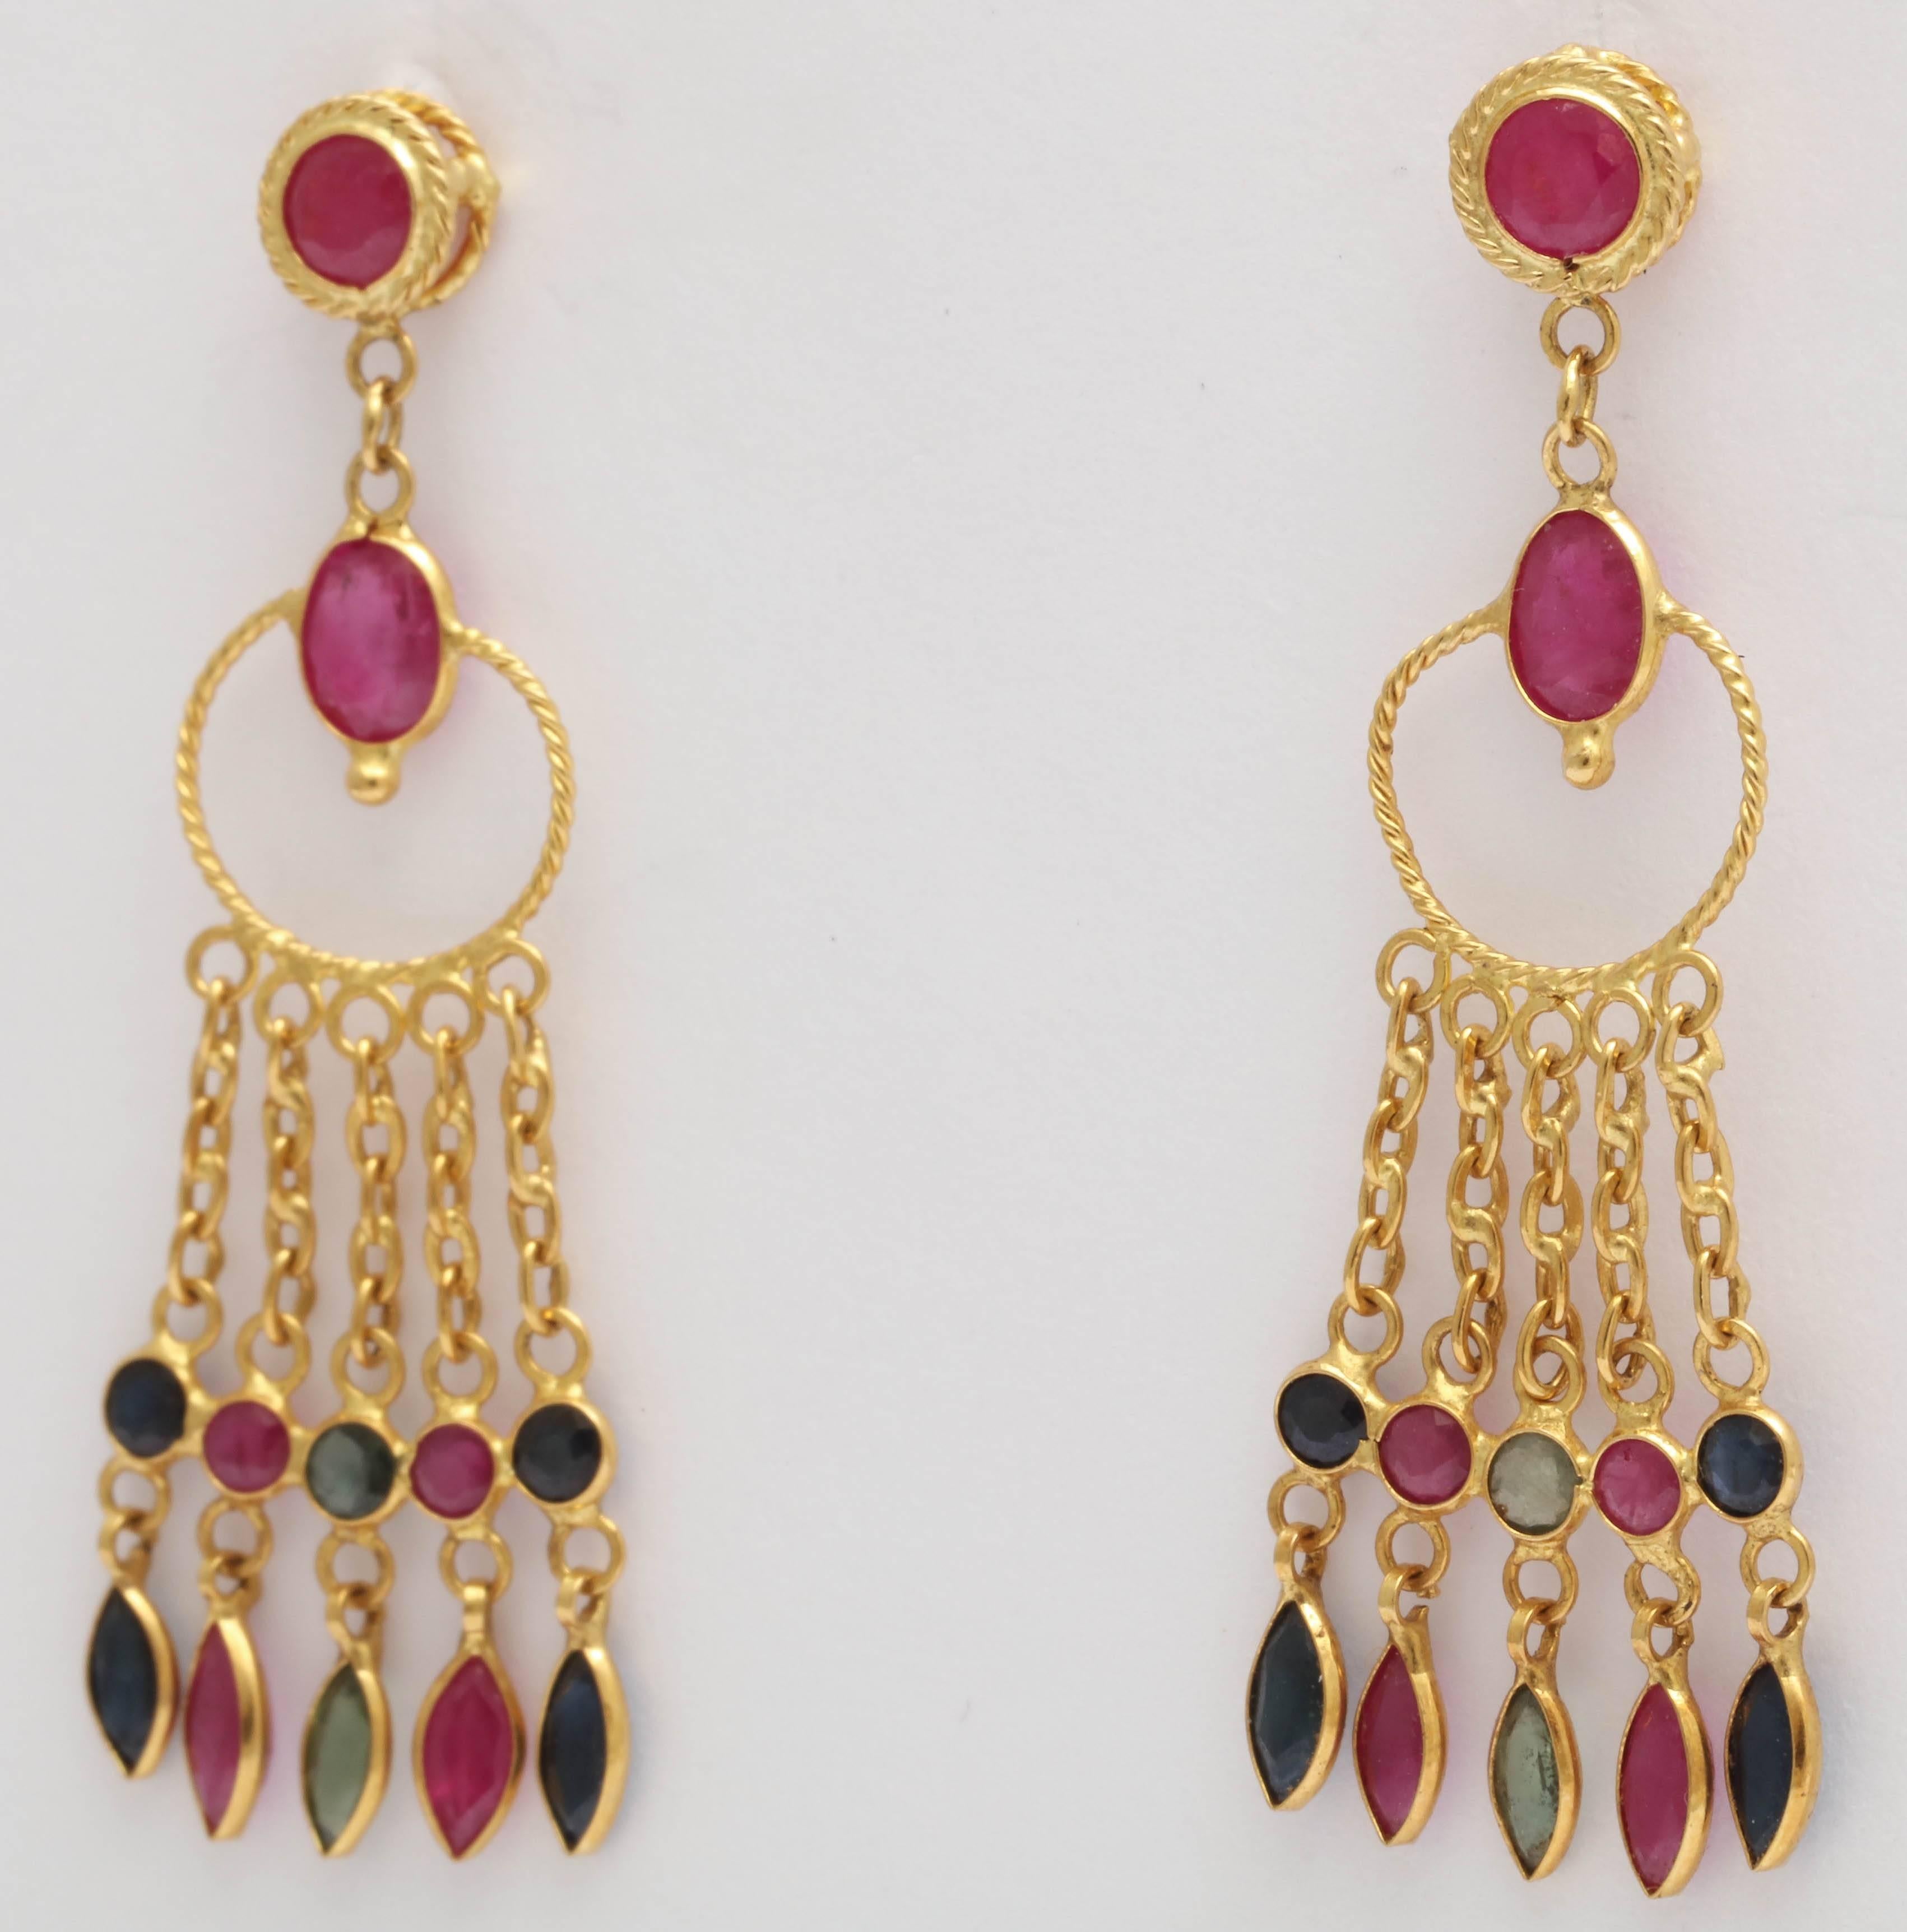 These earrings are made with red rubies, and green and blue sapphires set delicate 18 kt gold bezels. The top is a round ruby with a twisted wire bezel setting, post and back. These earrings dangle beautifully, are light, and colorful.